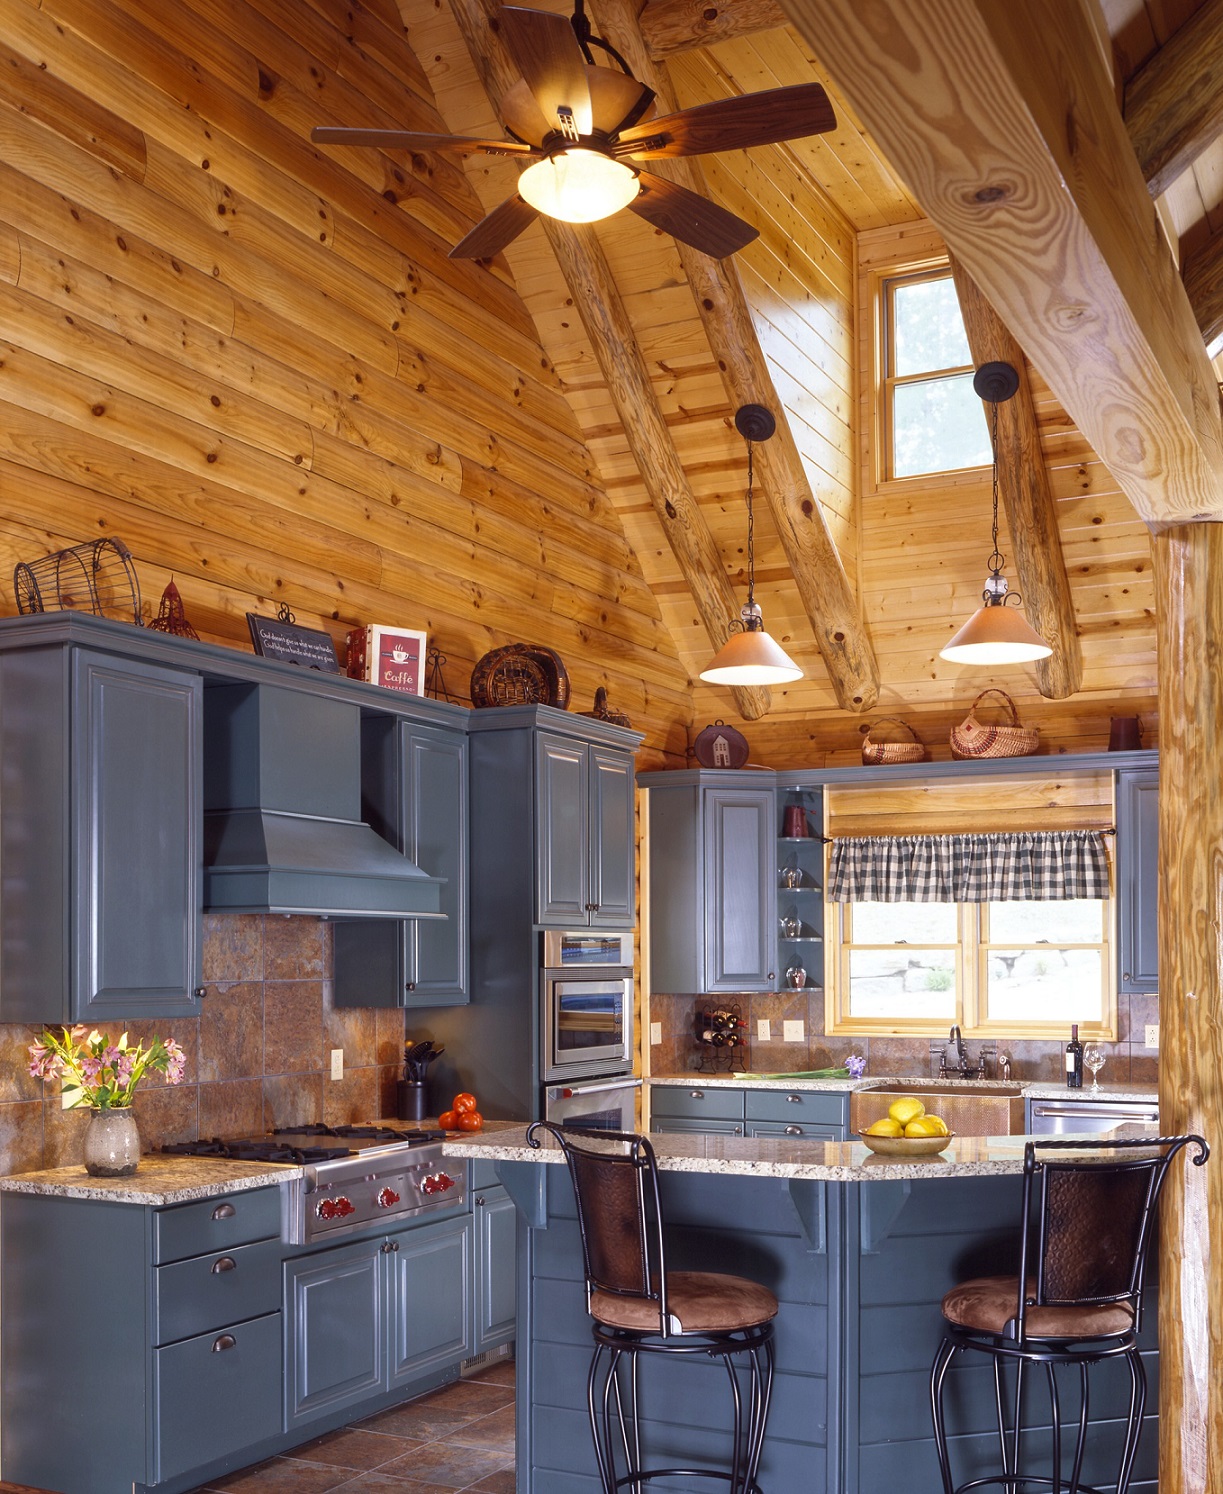 kitchen cabinet ideas for a cabin photo - 7